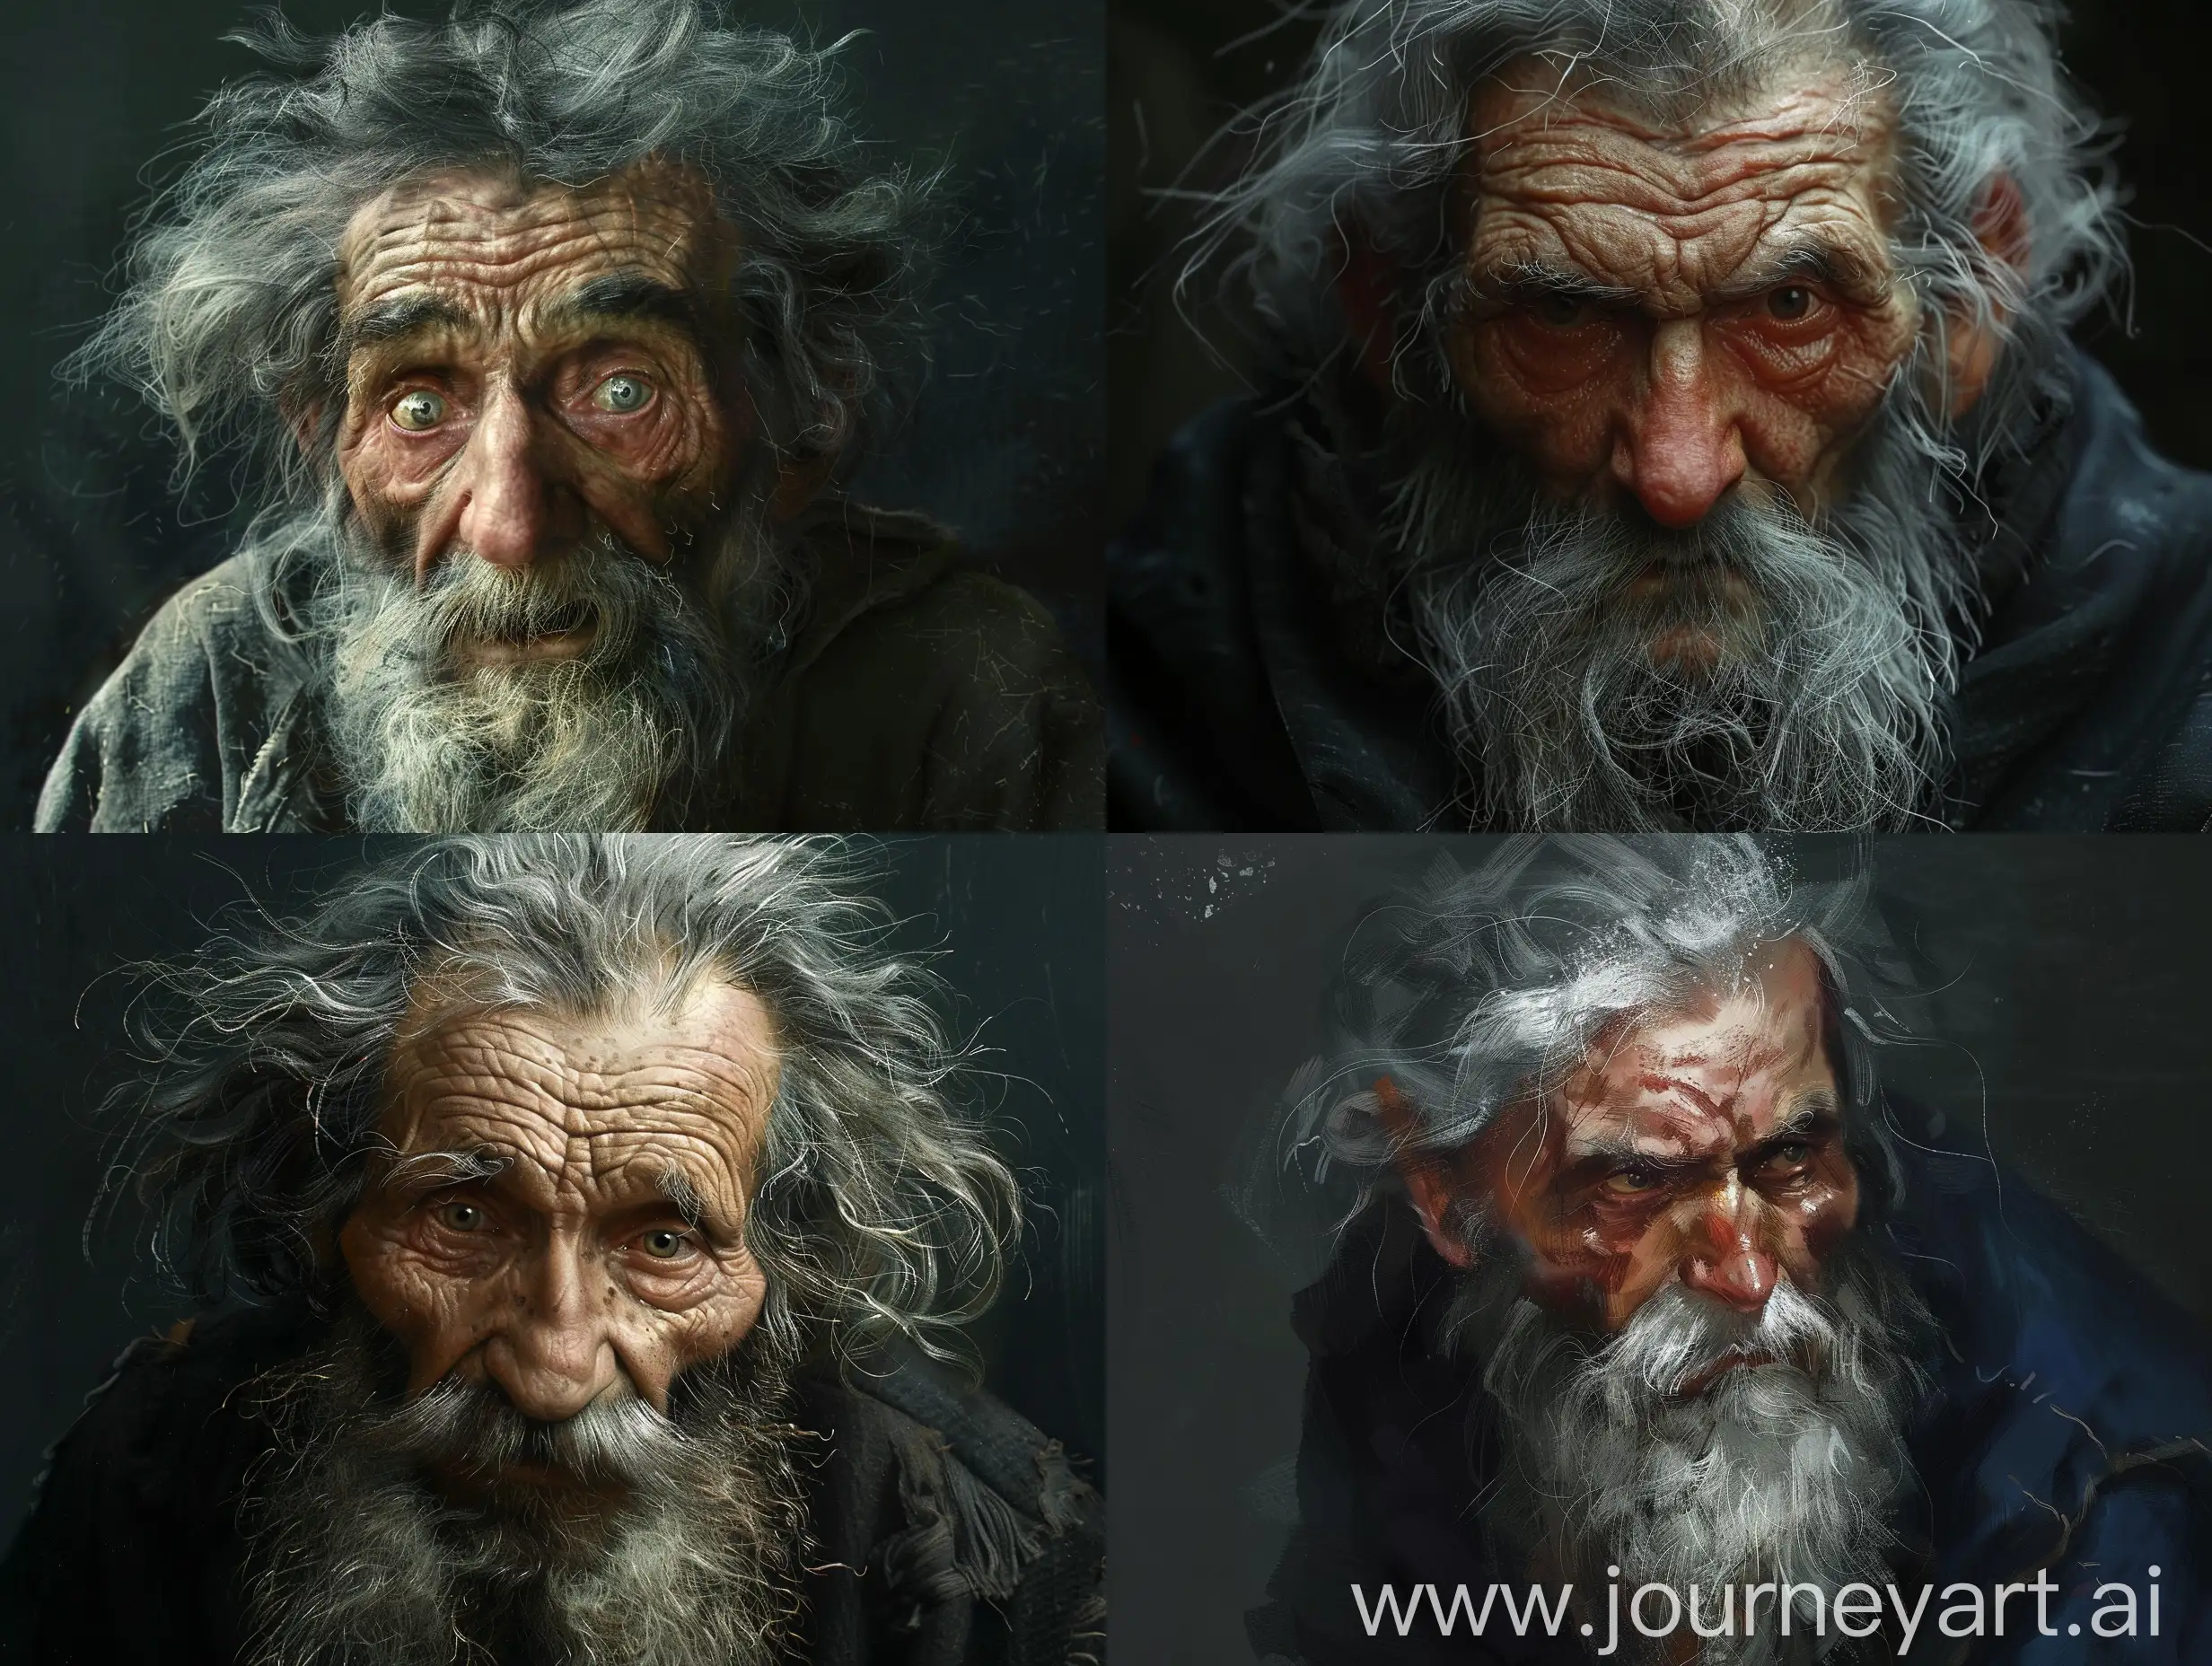 Eccentric-Hunchbacked-Man-with-Darting-Eyes-in-Gray-Hairs-Portrait